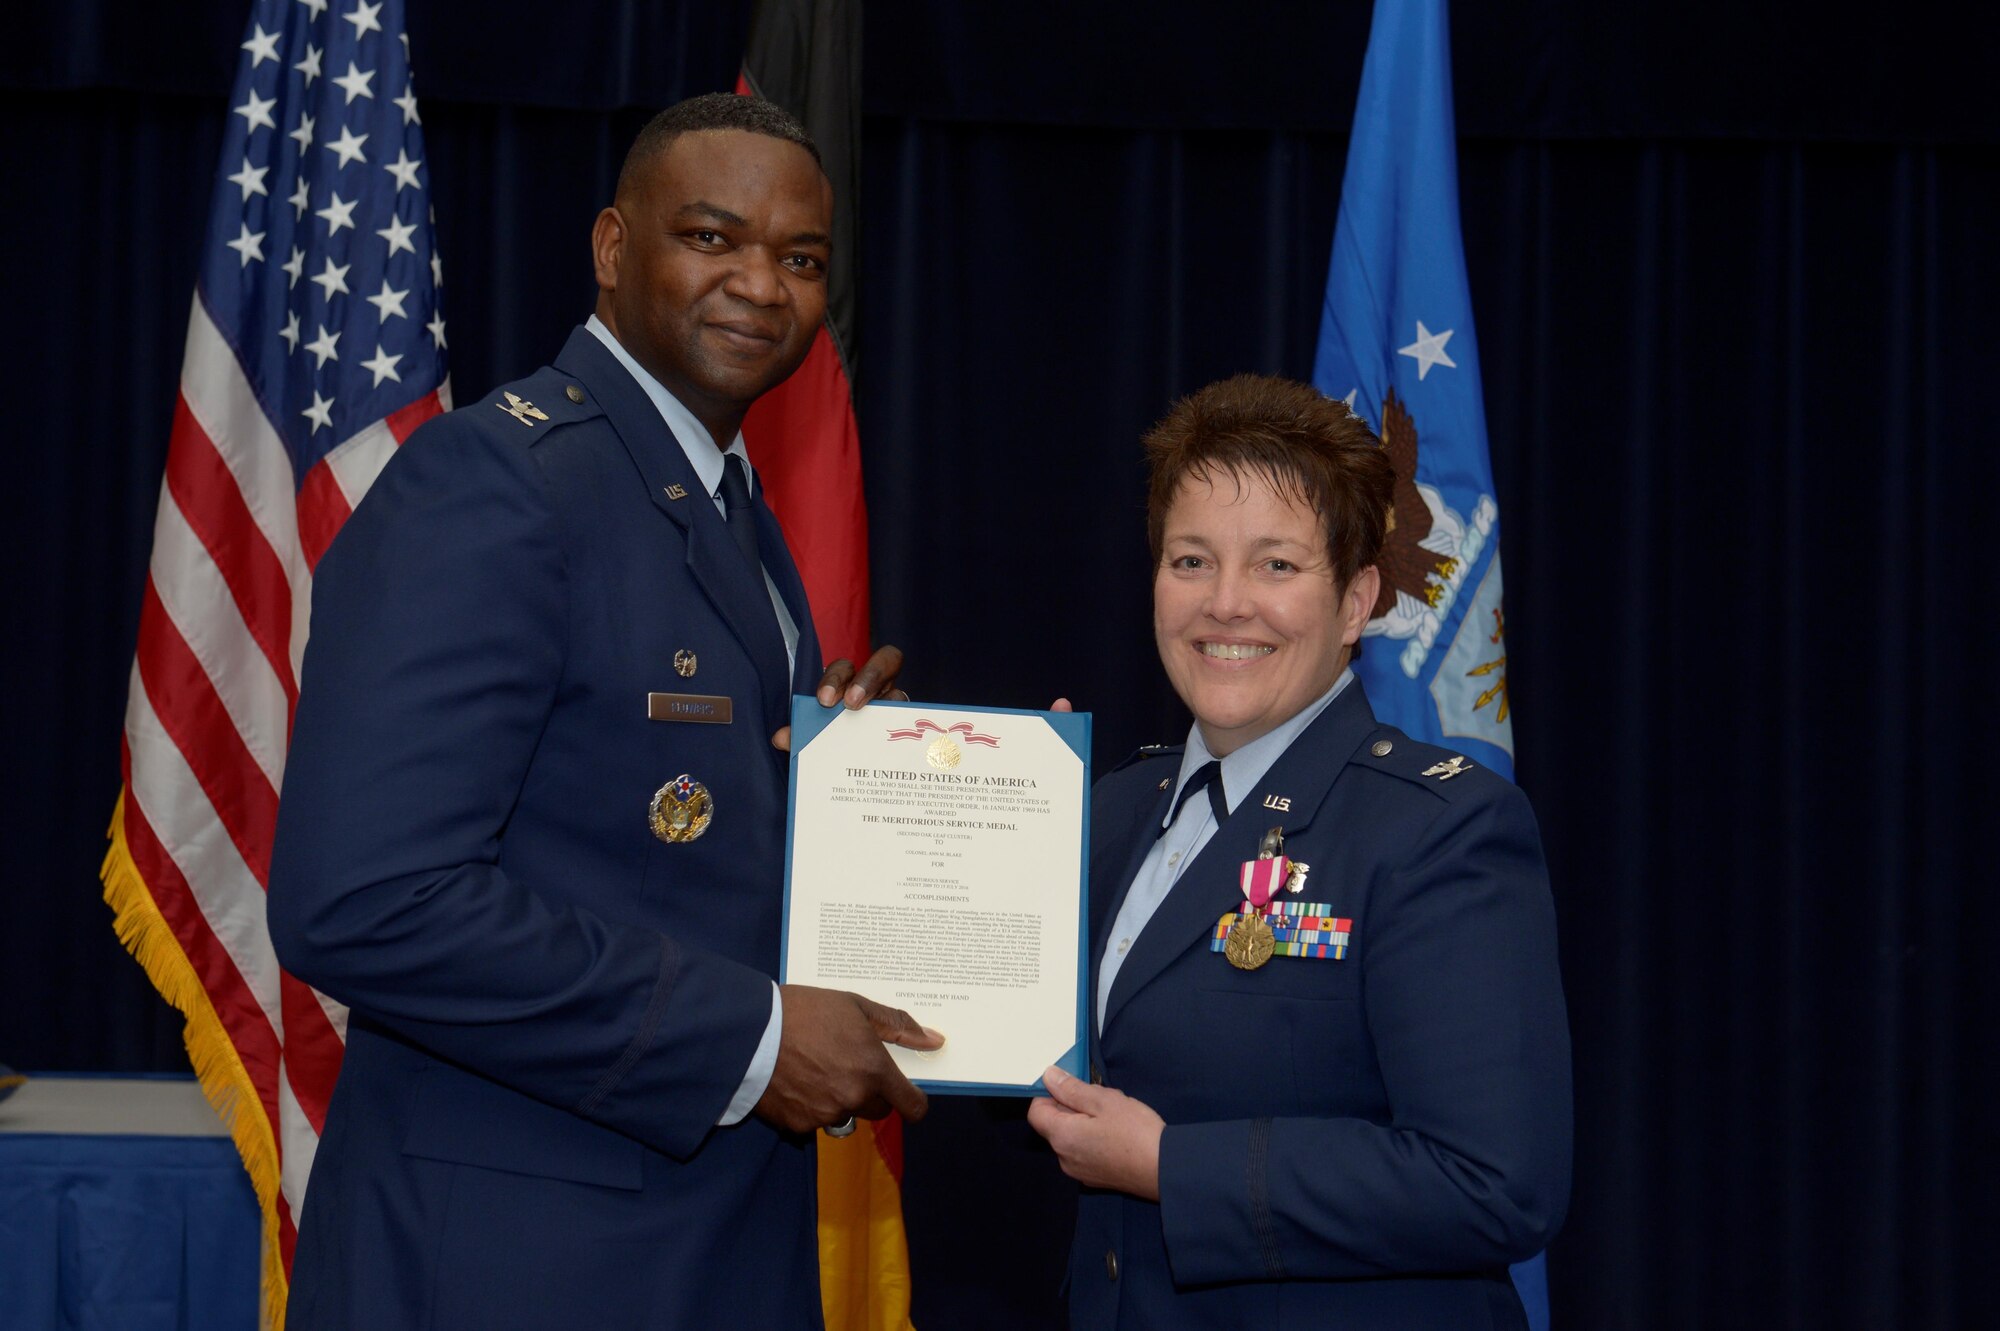 U.S. Air Force Col. Alfred Flowers, 52nd Medical Group commander, left, presents the Meritorious Service Medal to U.S. Air Force Col. Ann Blake, outgoing 52nd Dental Squadron commander, during the 52nd DS change of command ceremony on Spangdahlem Air Base, Germany, July 11, 2016. Blake received the MSM in recognition of her service of leading the 52nd DS. (U.S. Air Force photo by Staff
Sgt. Jonathan Snyder/Released)